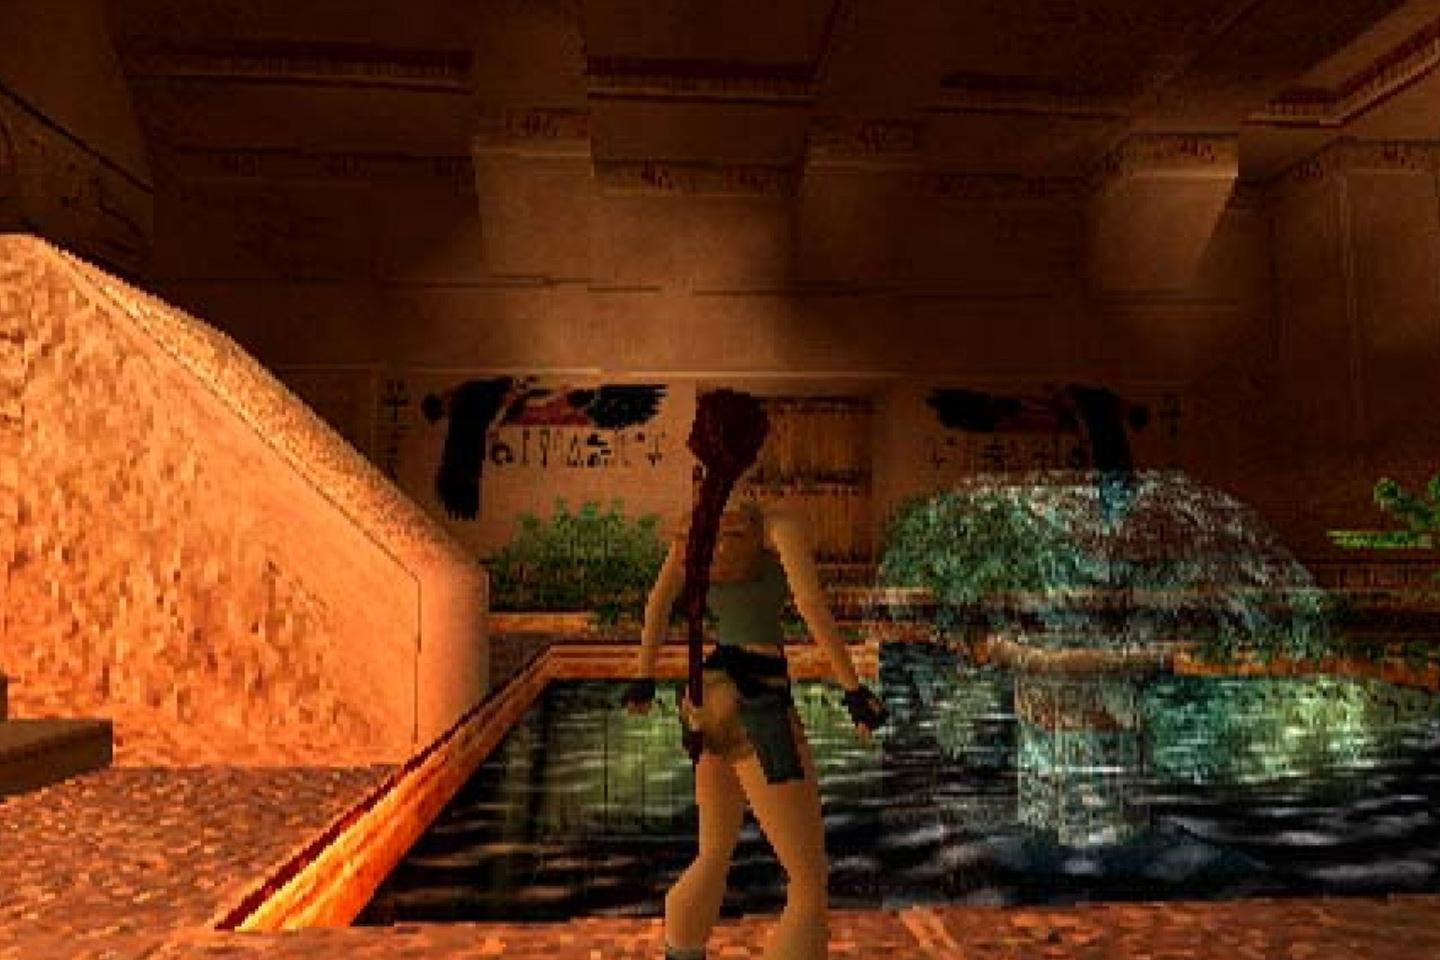 Lara walking by fountain in the middle of a dimly lit tomb.